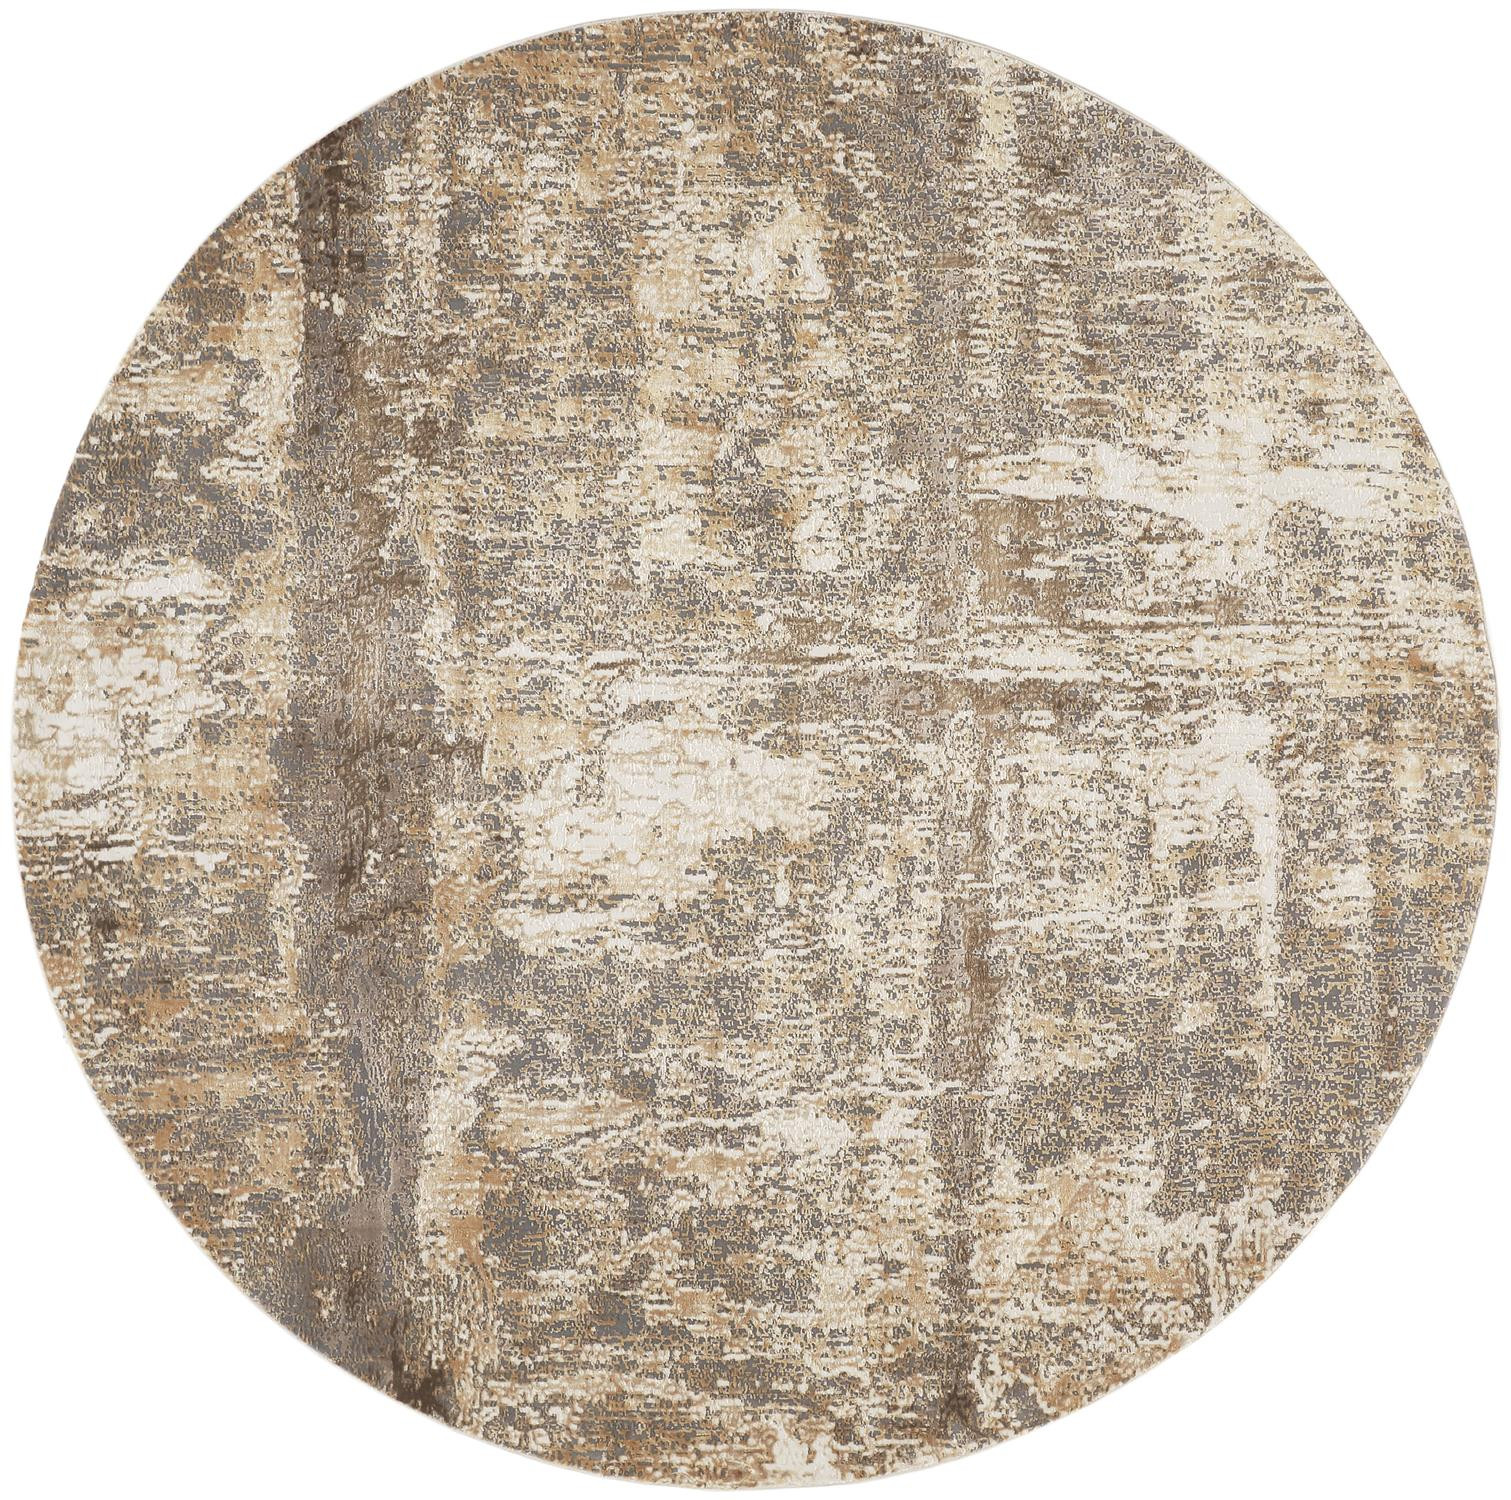 8' Tan Ivory And Brown Round Abstract Area Rug-514694-1